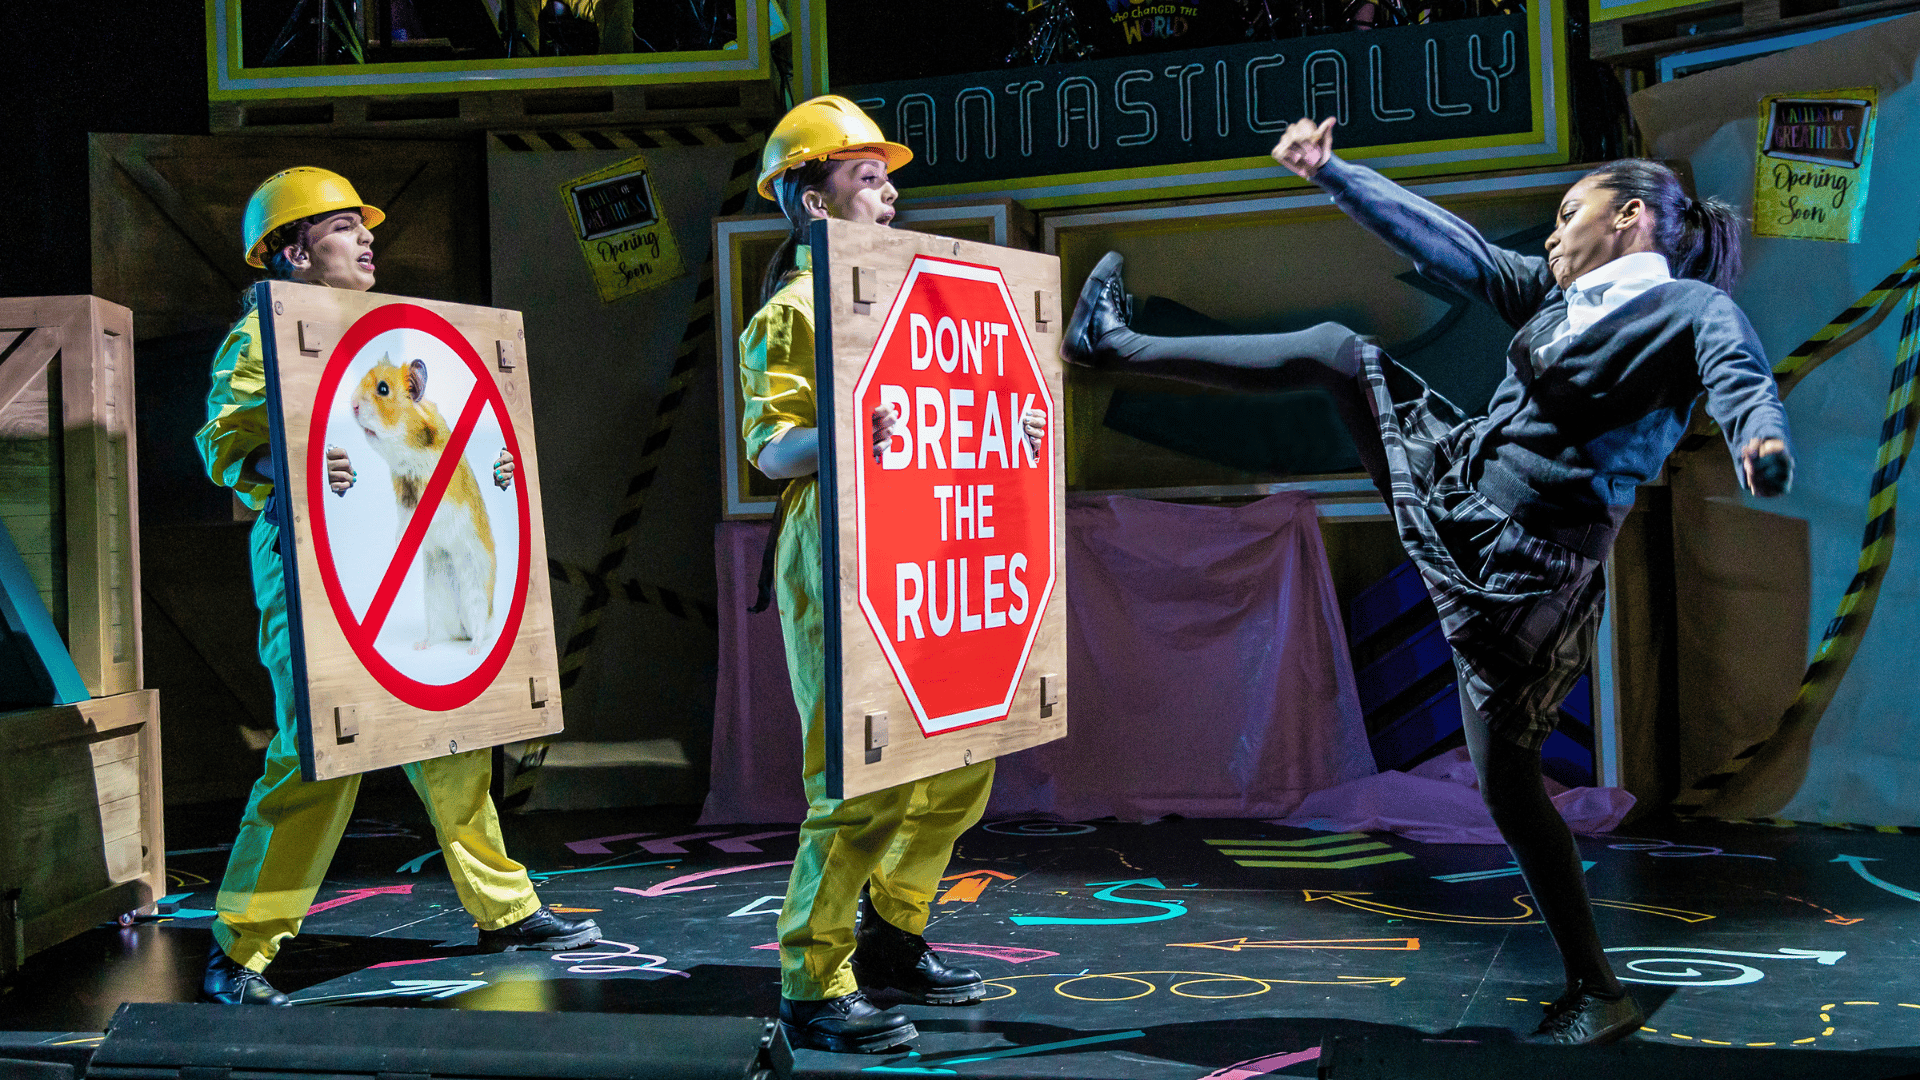 2 characters dressed as builders are holding signs, with one sign reading 'DON'T BREAK THE RULES'. Another character is looking angry and going to kick the sign.